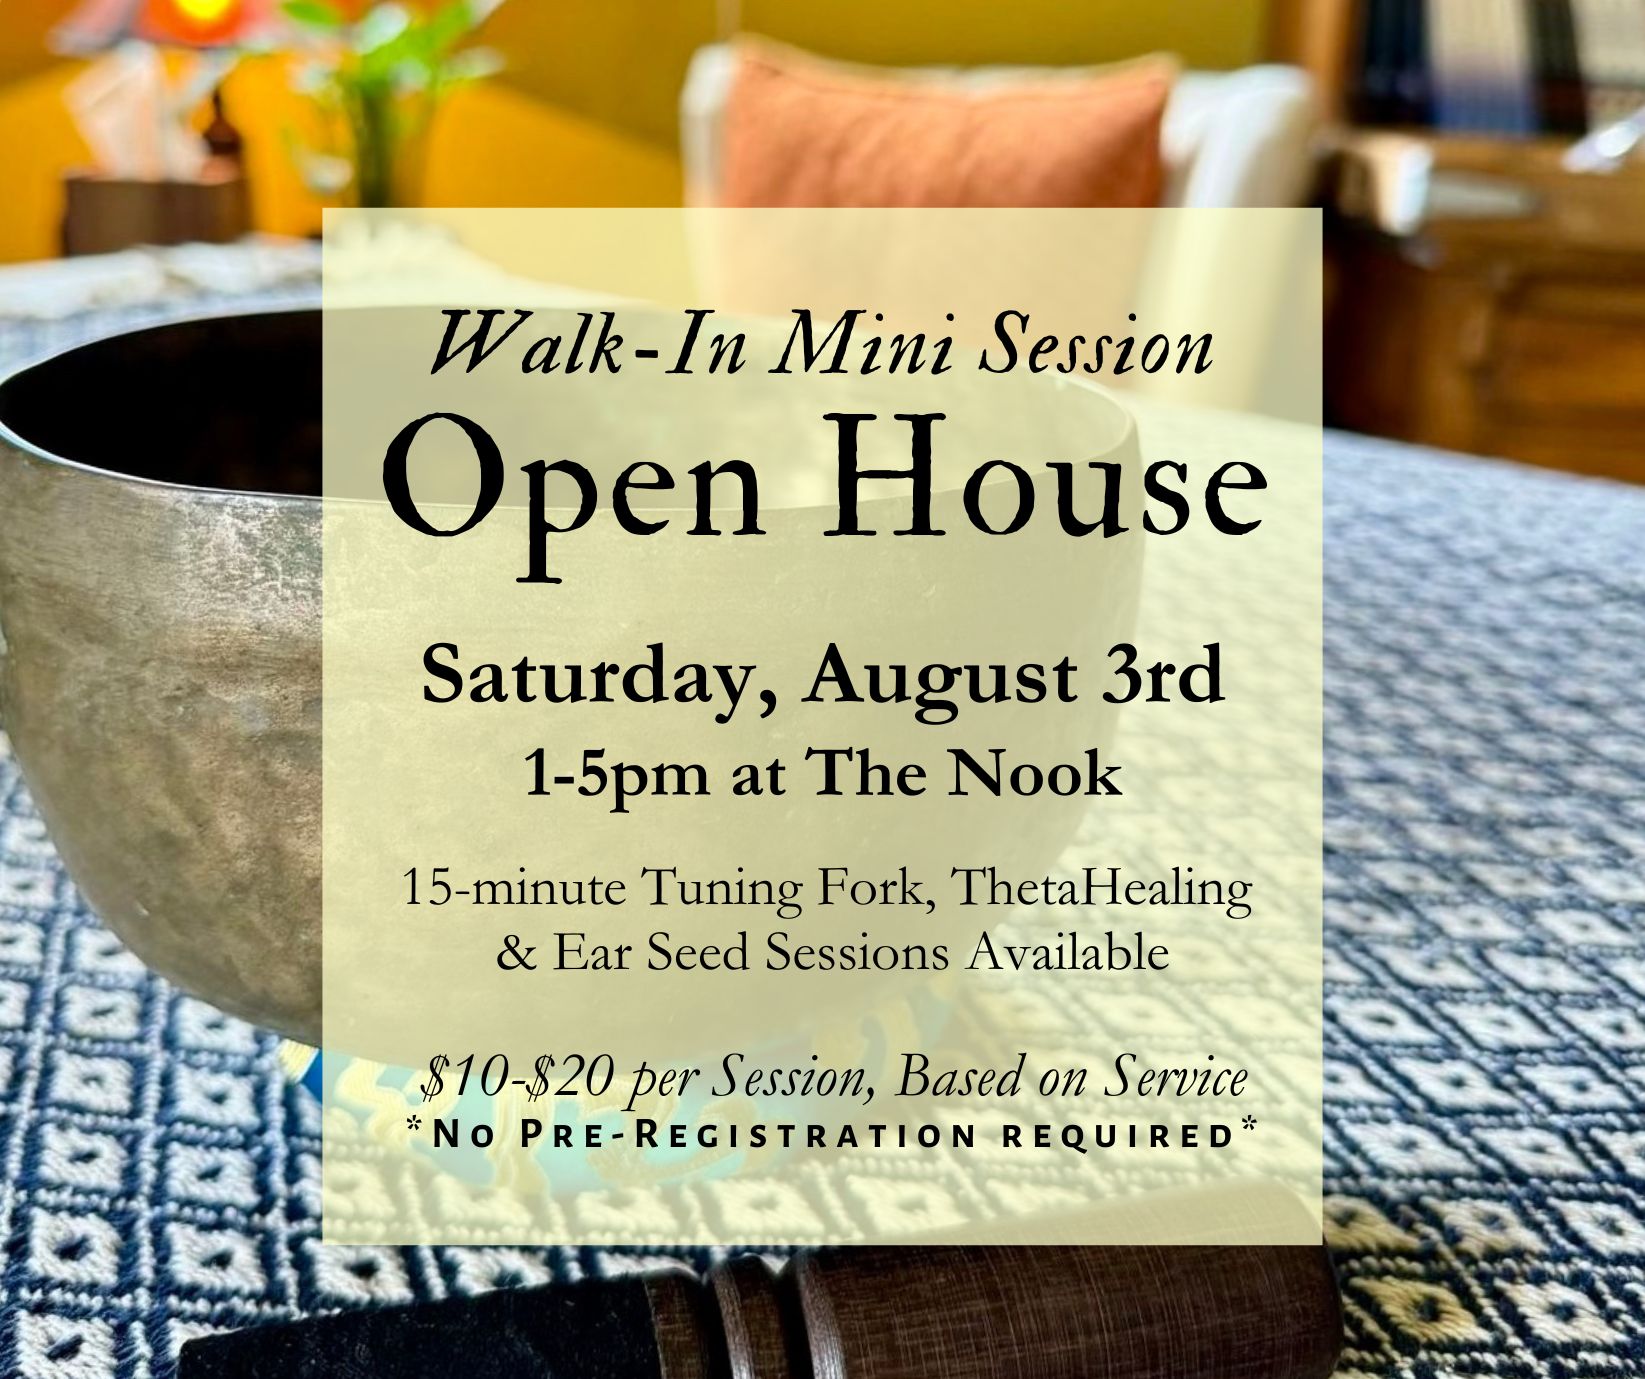 Open House at The Nook during the Festival of the Arts